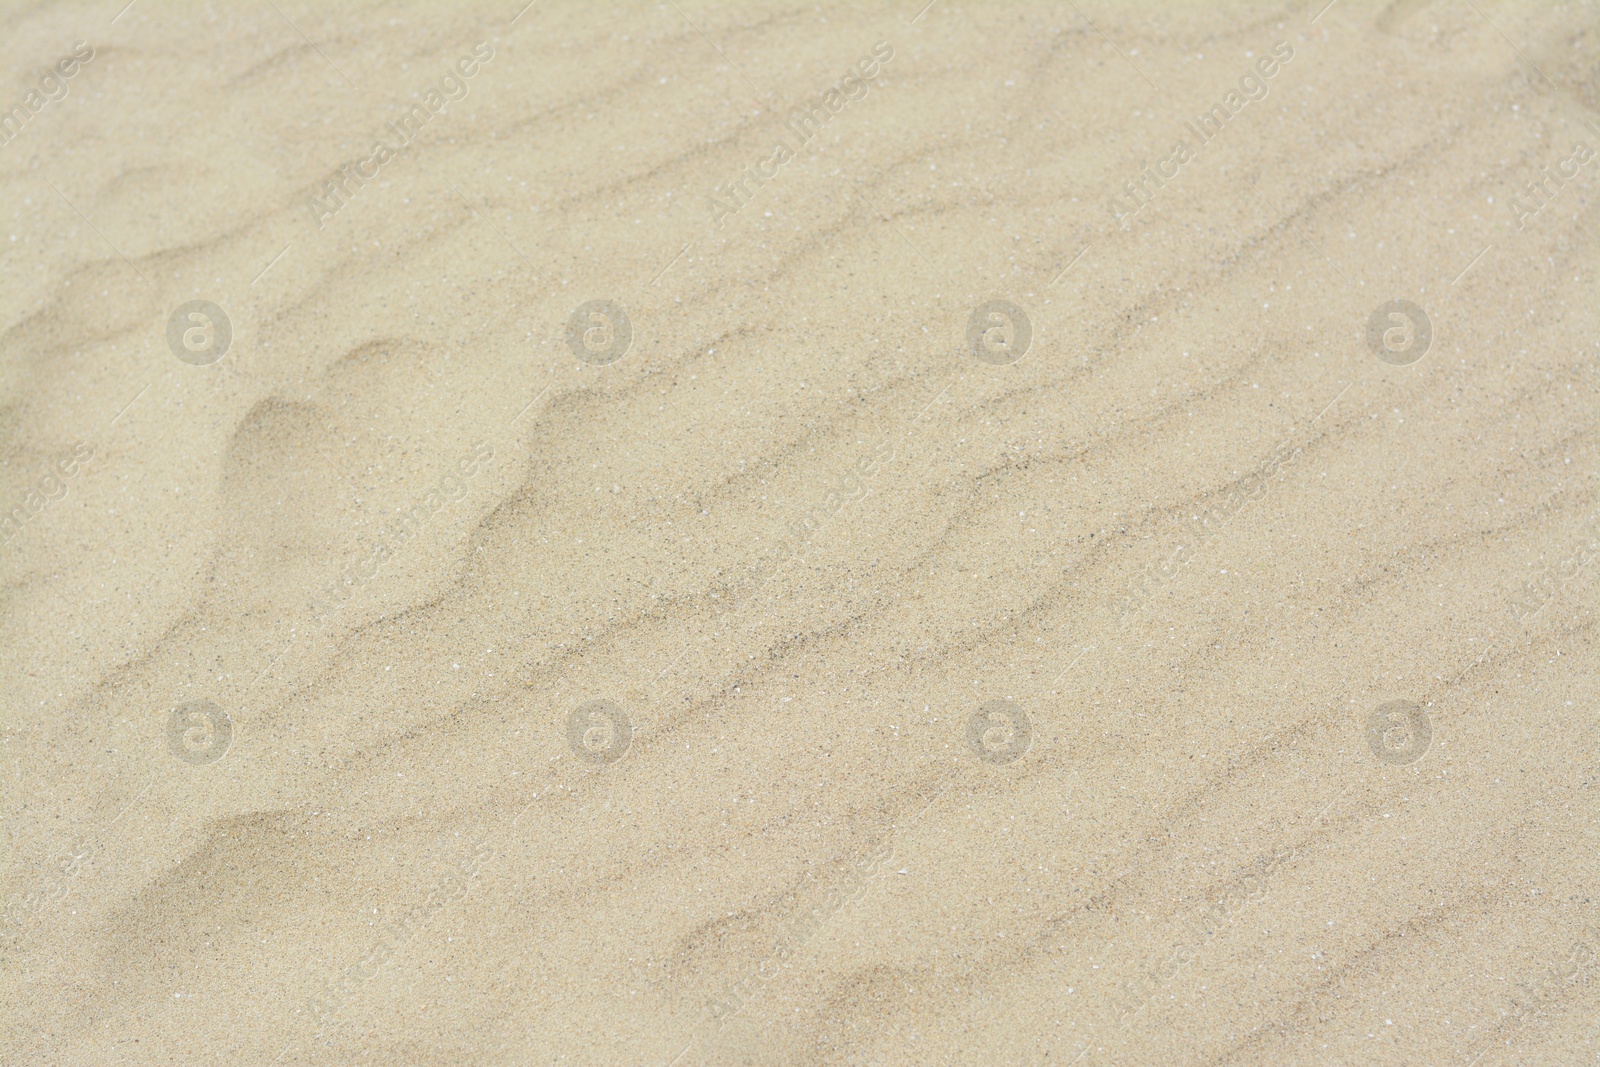 Photo of Dry beach sand with wave pattern as background